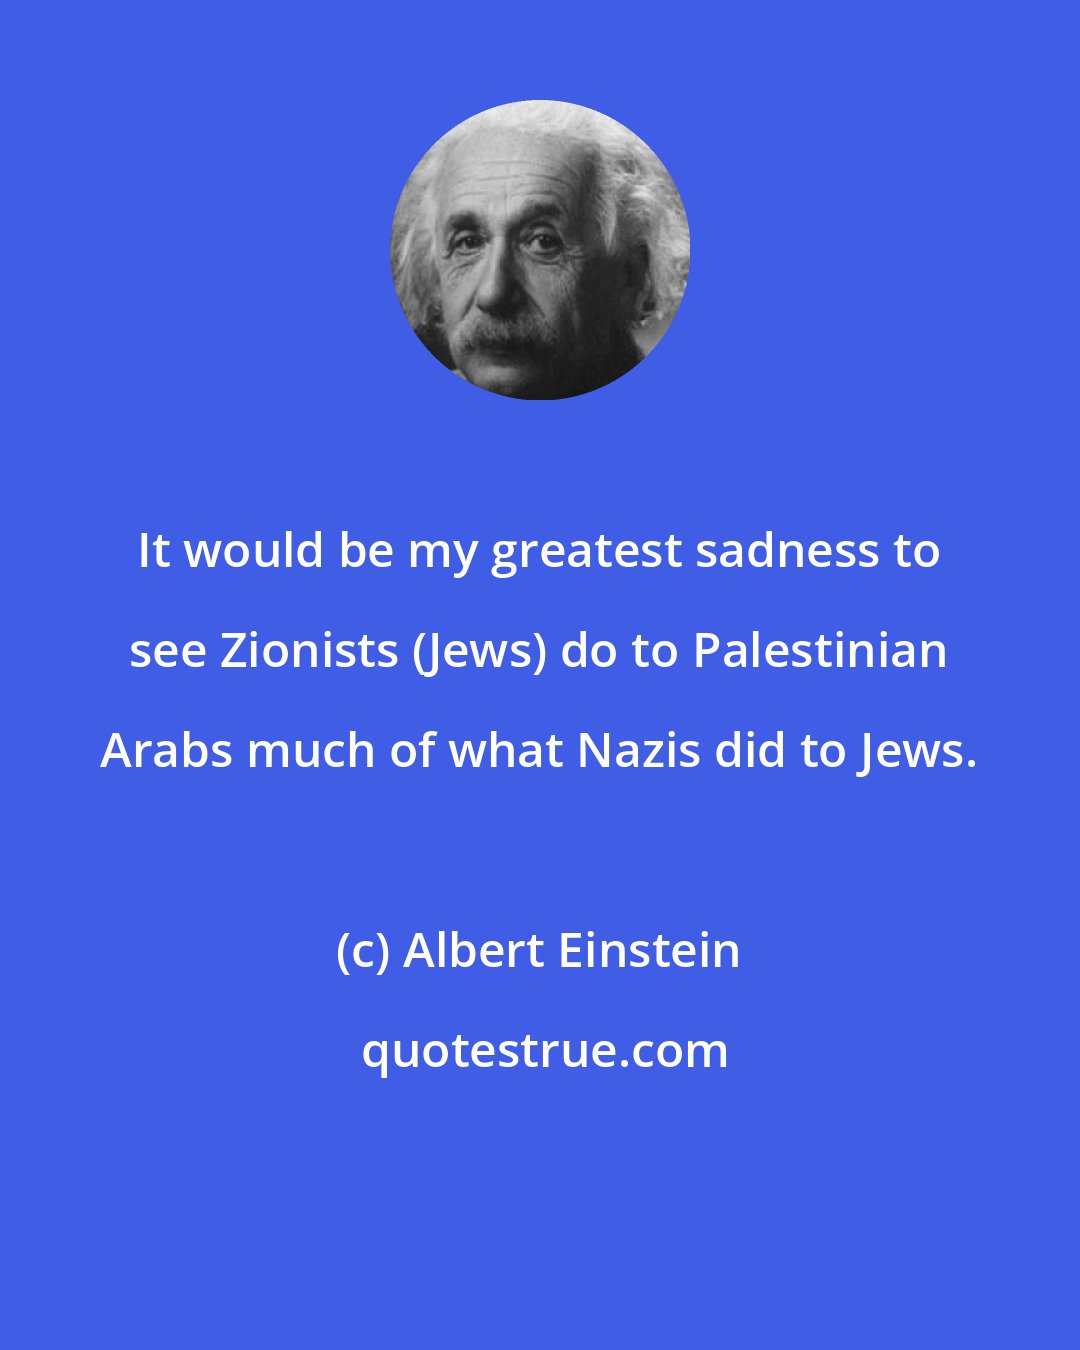 Albert Einstein: It would be my greatest sadness to see Zionists (Jews) do to Palestinian Arabs much of what Nazis did to Jews.